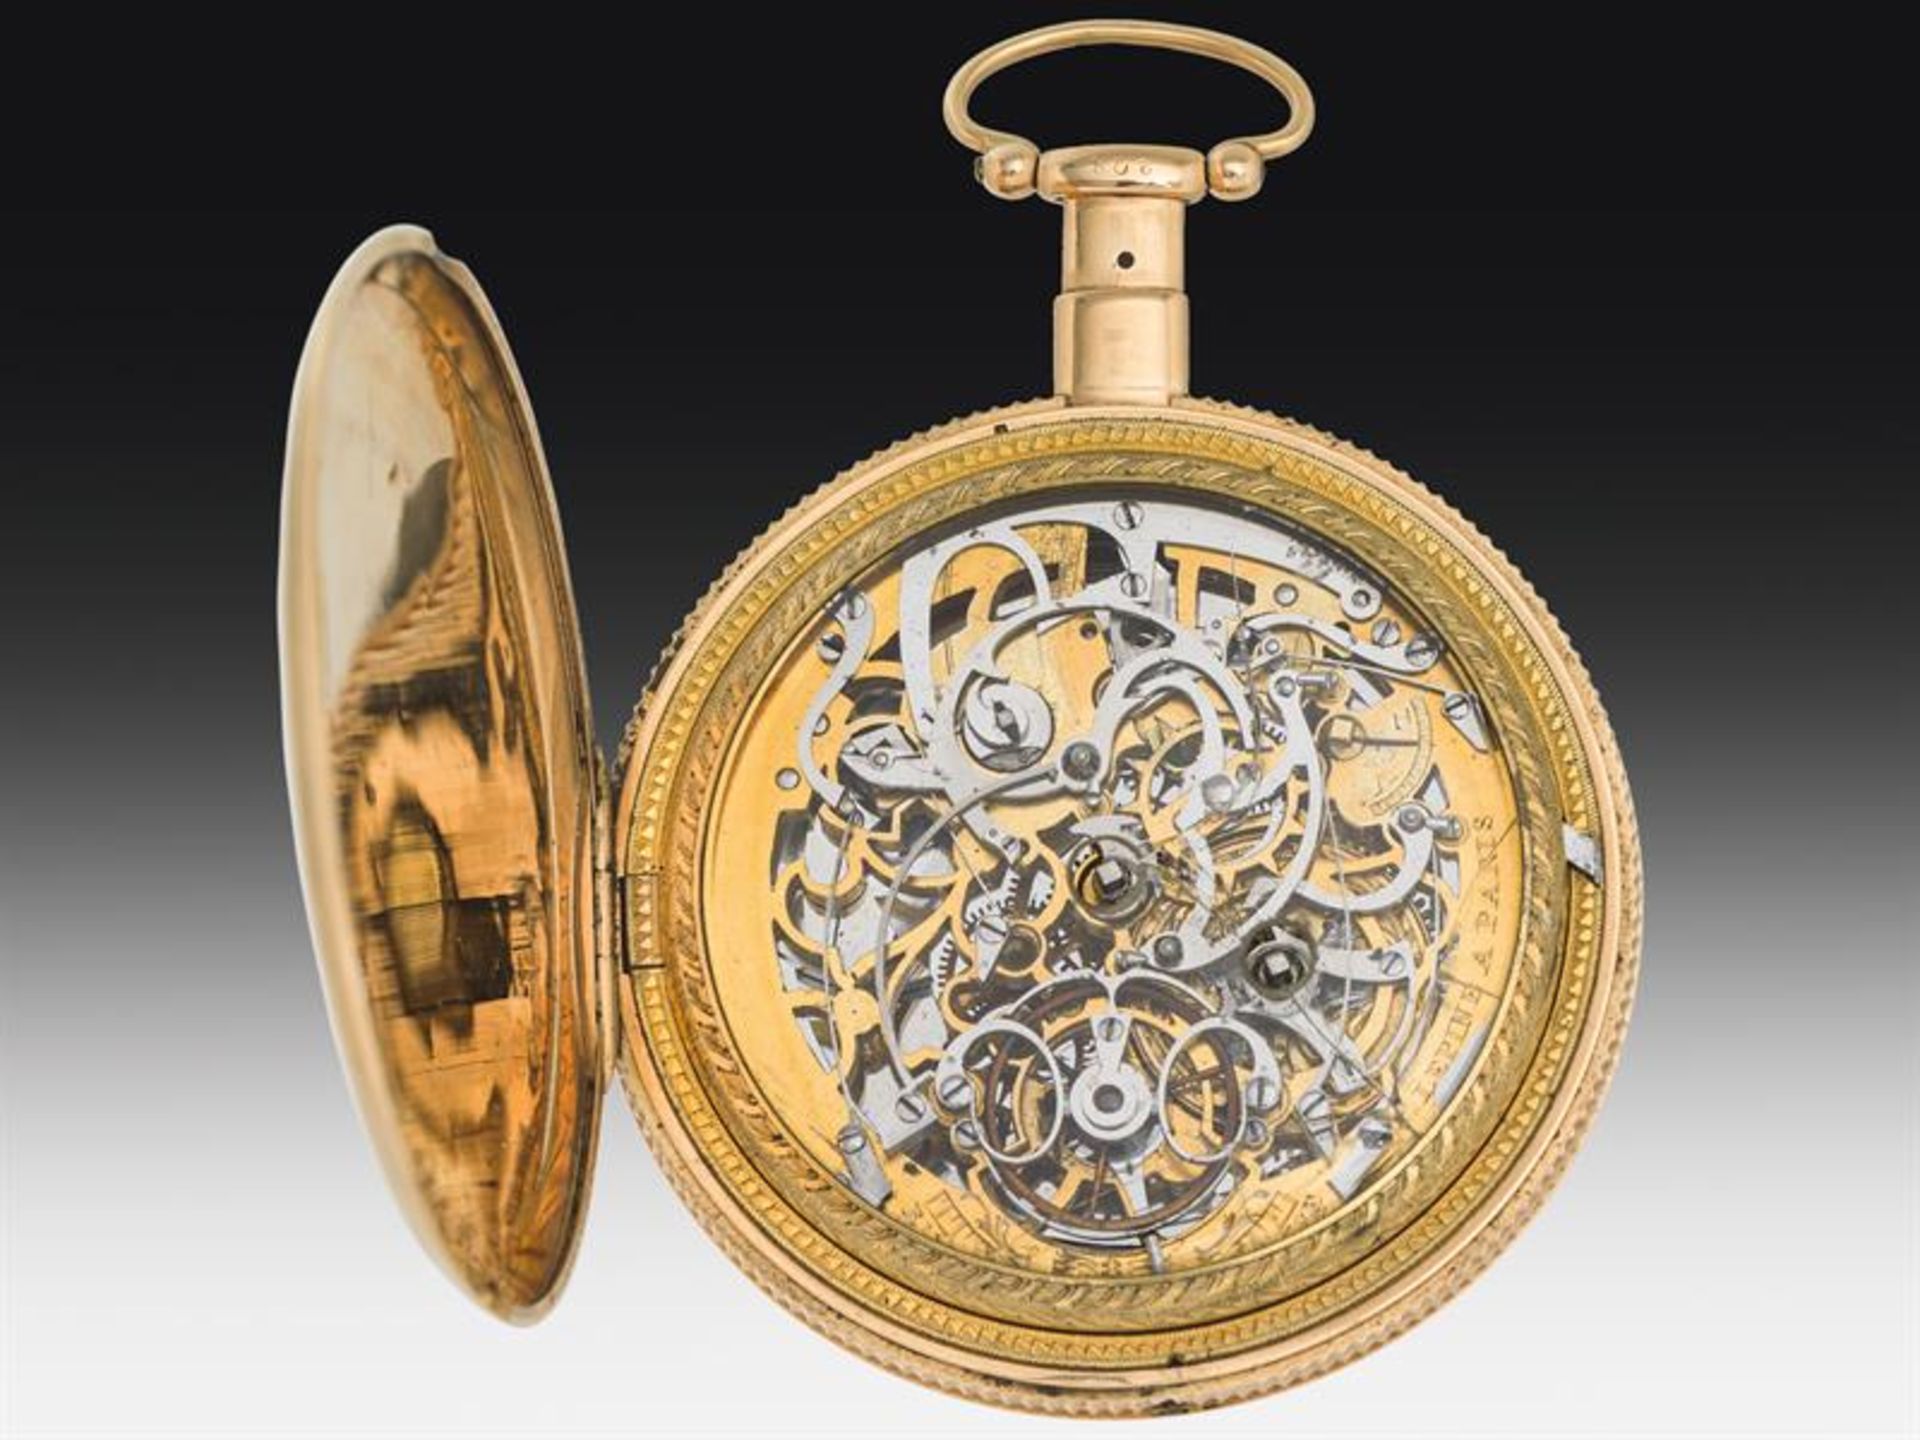 Golden pocket watch with quarter-hour repetition